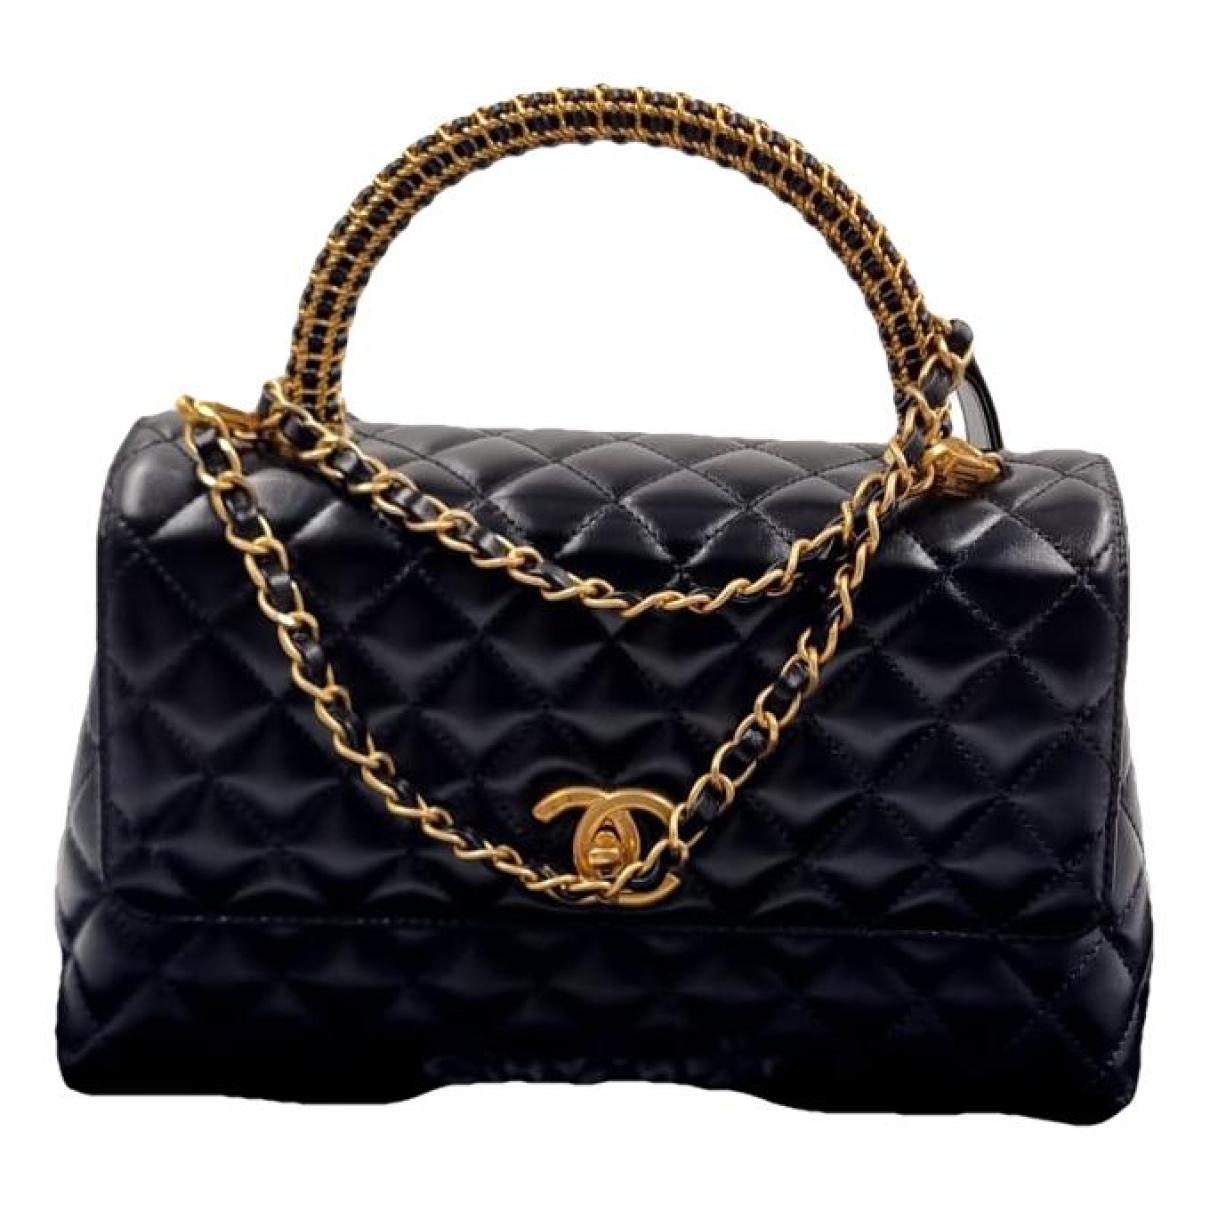 Coco luxe leather handbag Chanel Black in Leather - 27449443